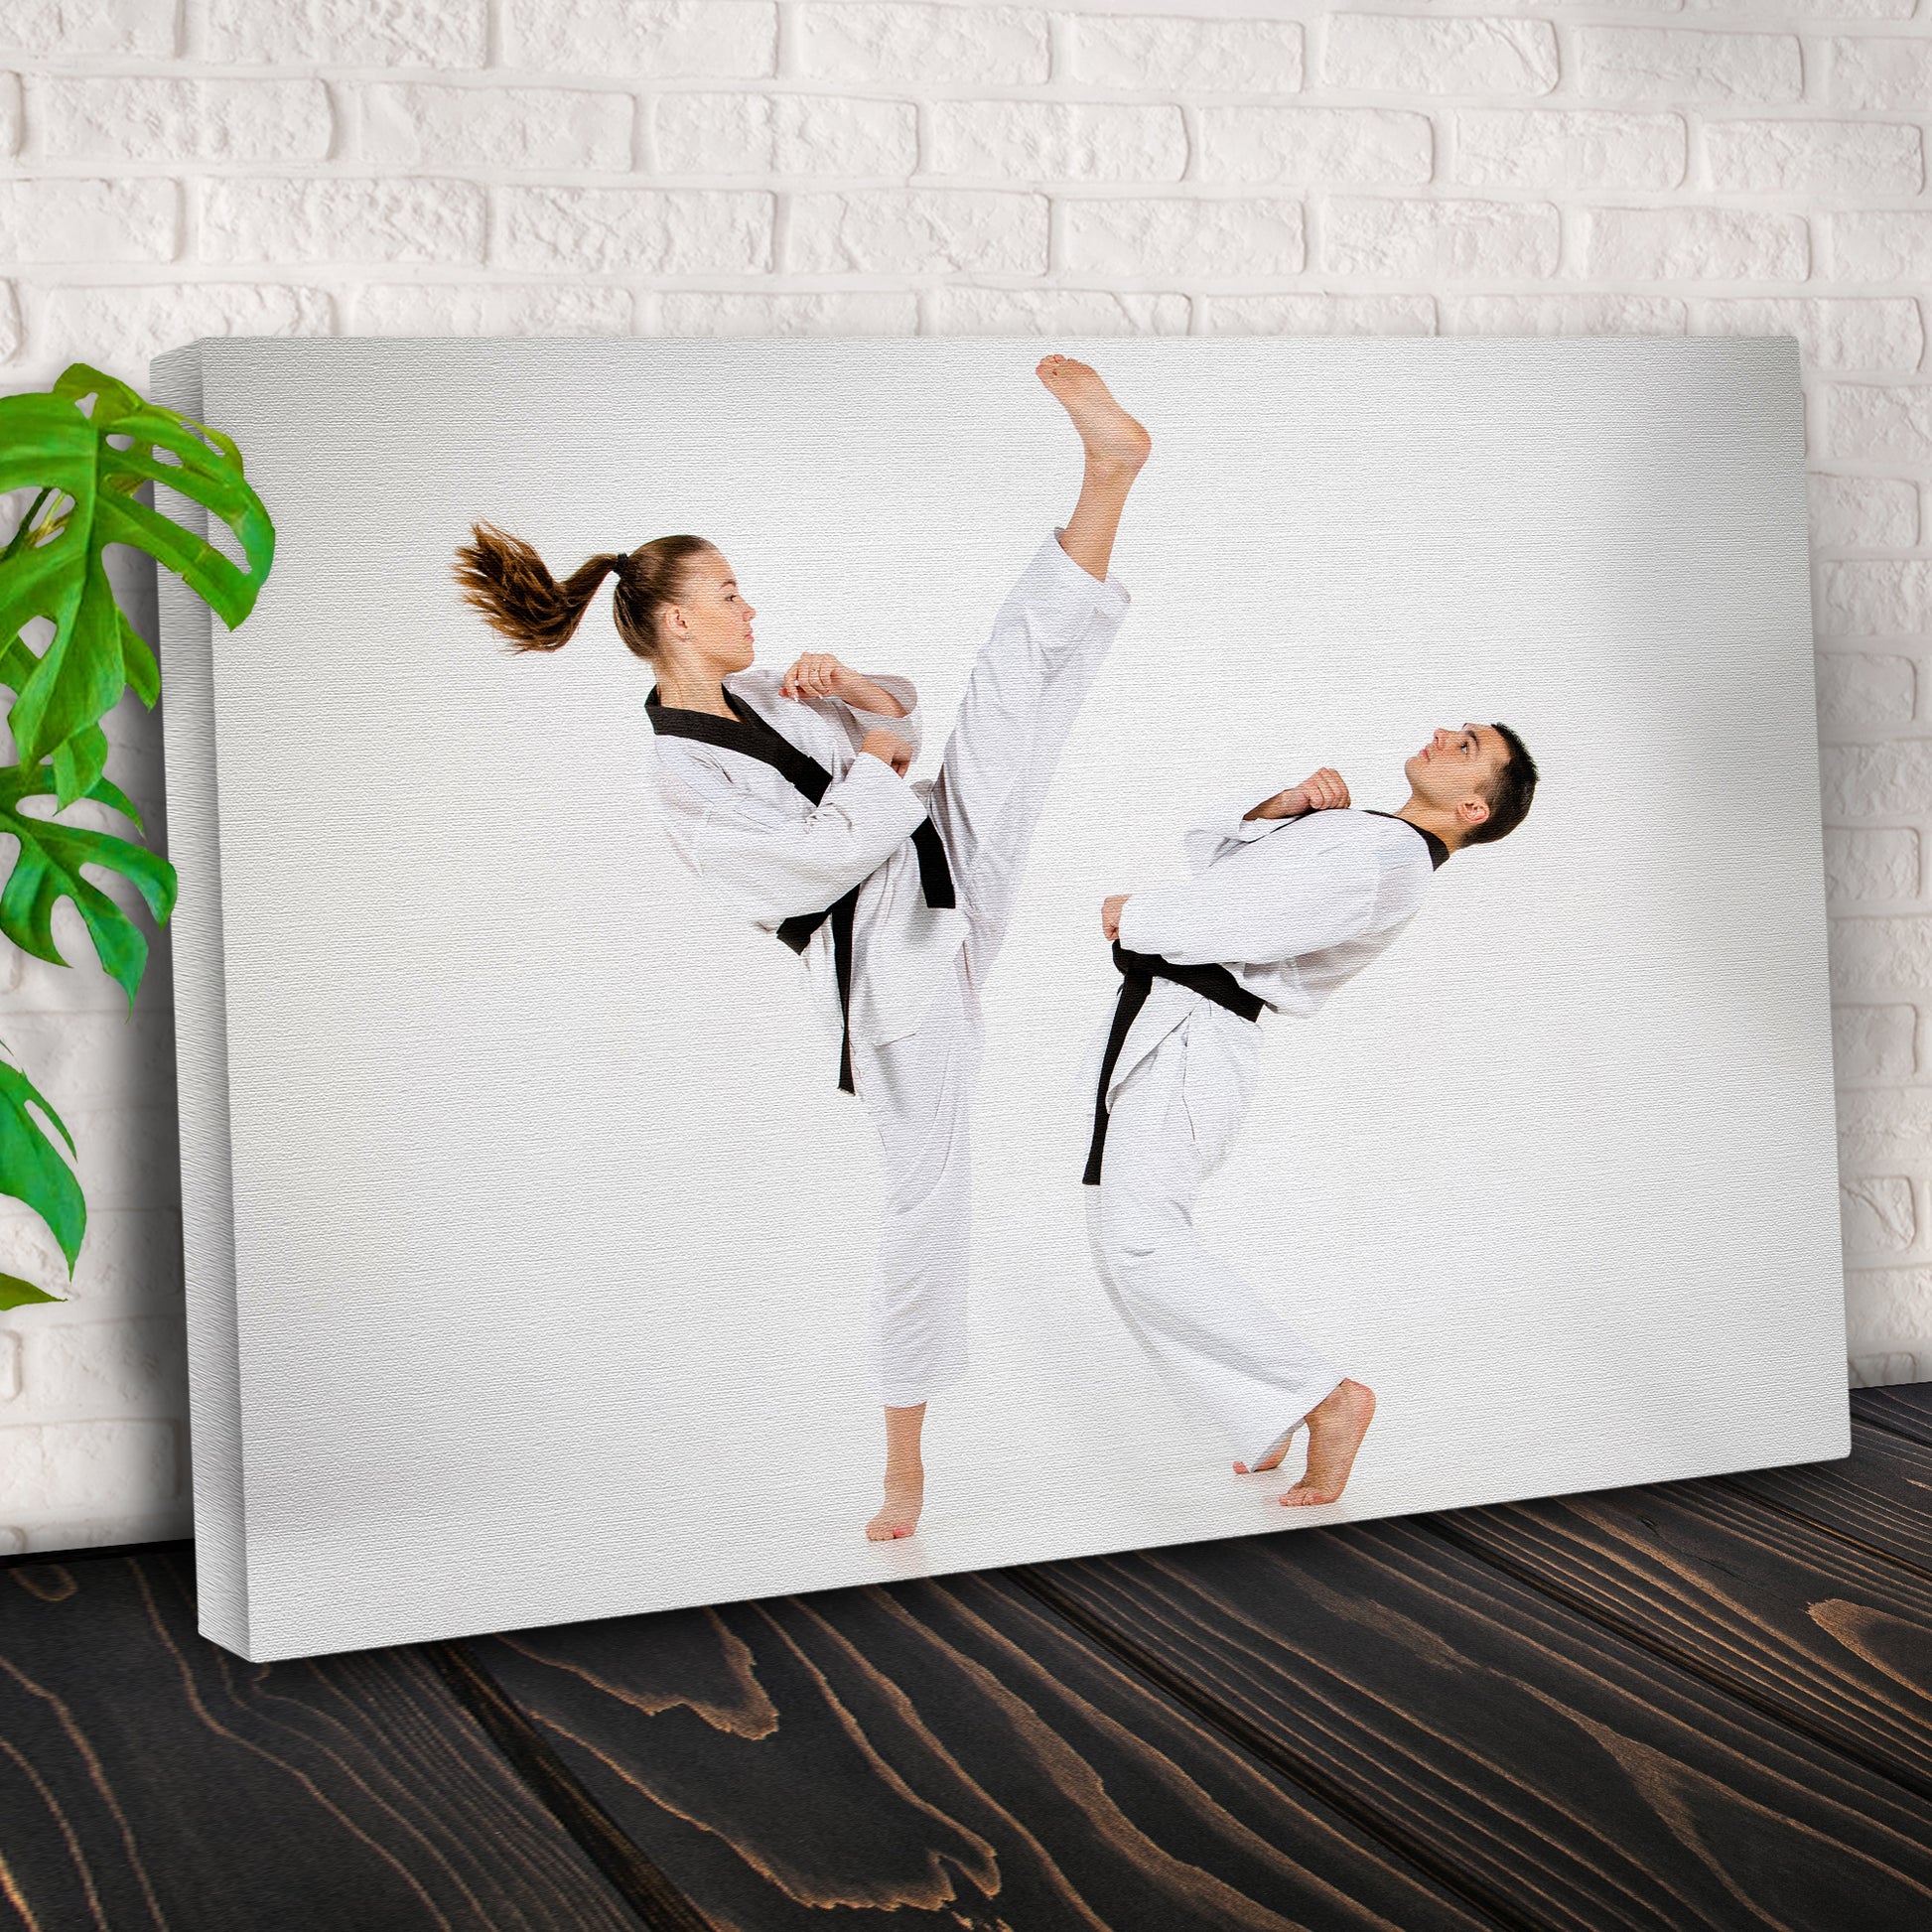 Taekwondo Kick Canvas Wall Art Style 2 - Image by Tailored Canvases